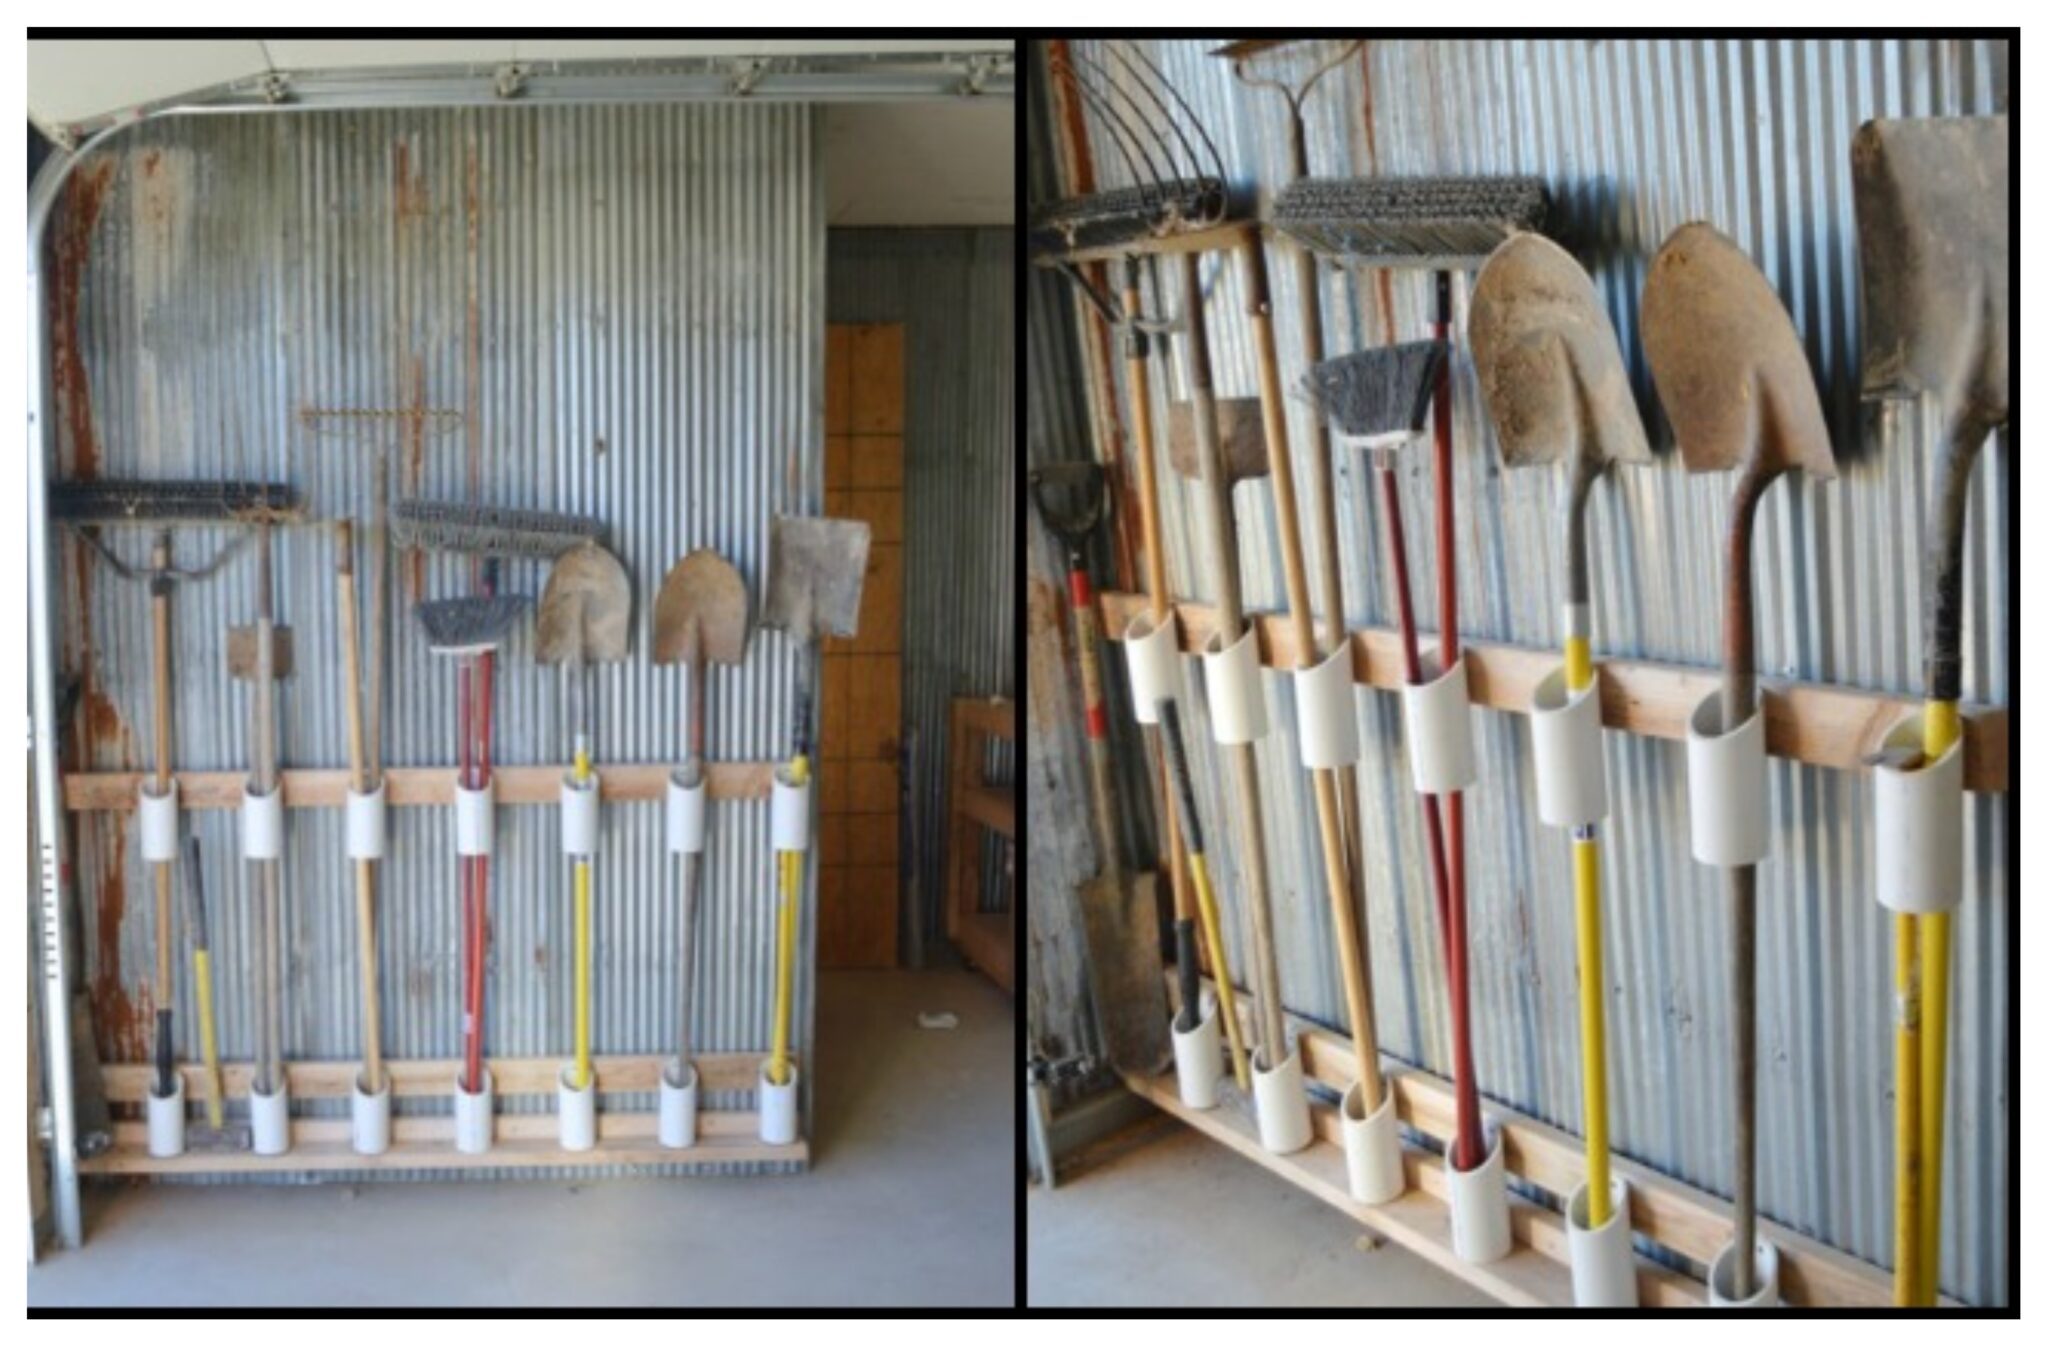 Pvc Yard Tool Storage The Best Way To Organize Your Garage And Garden